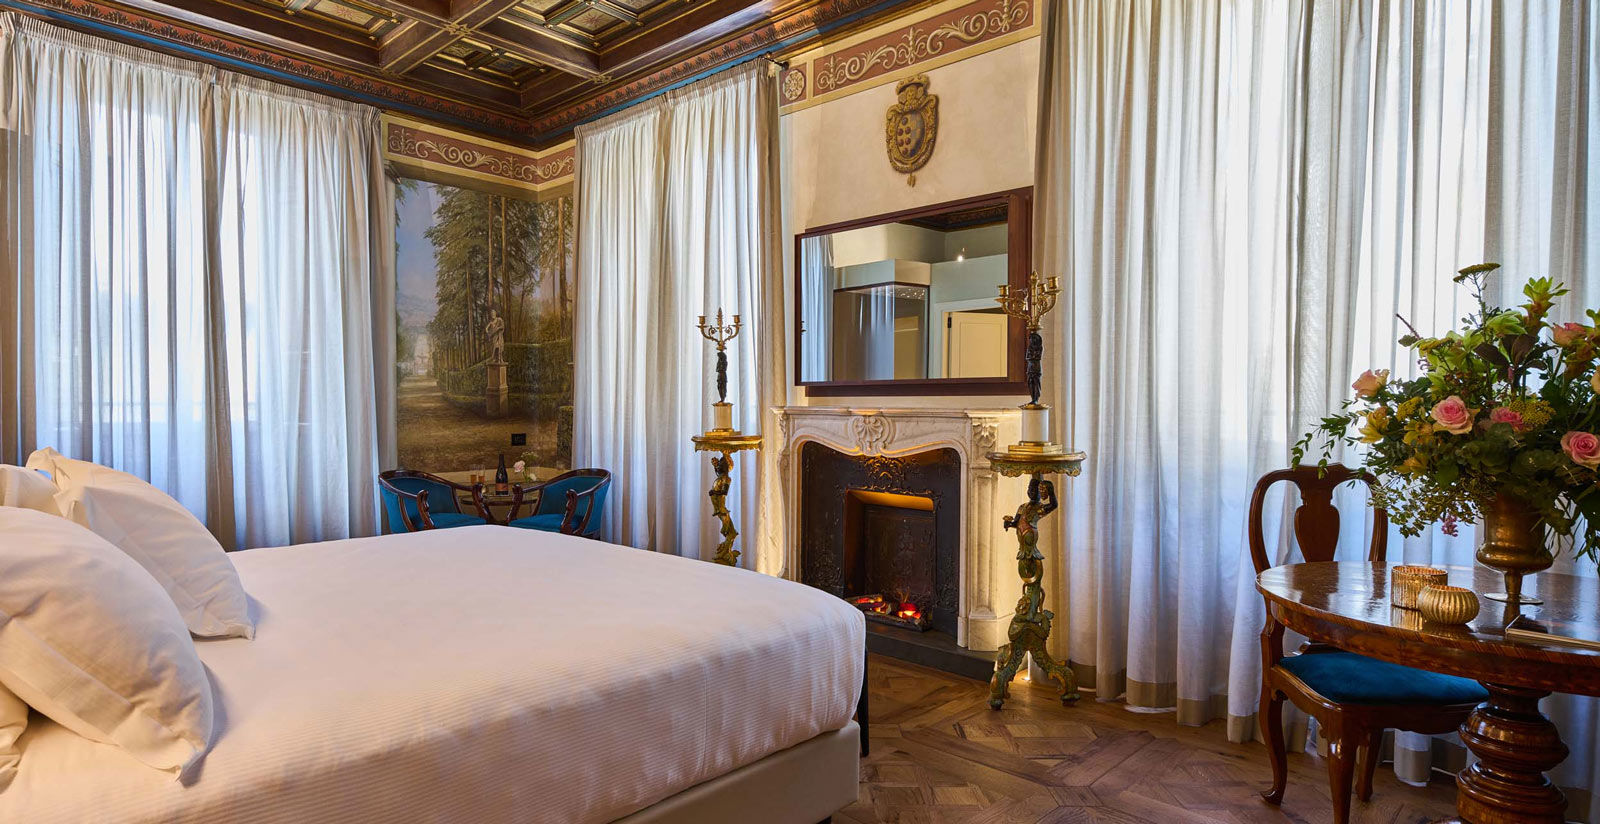 Duomo Luxury Florence - Le camere 8